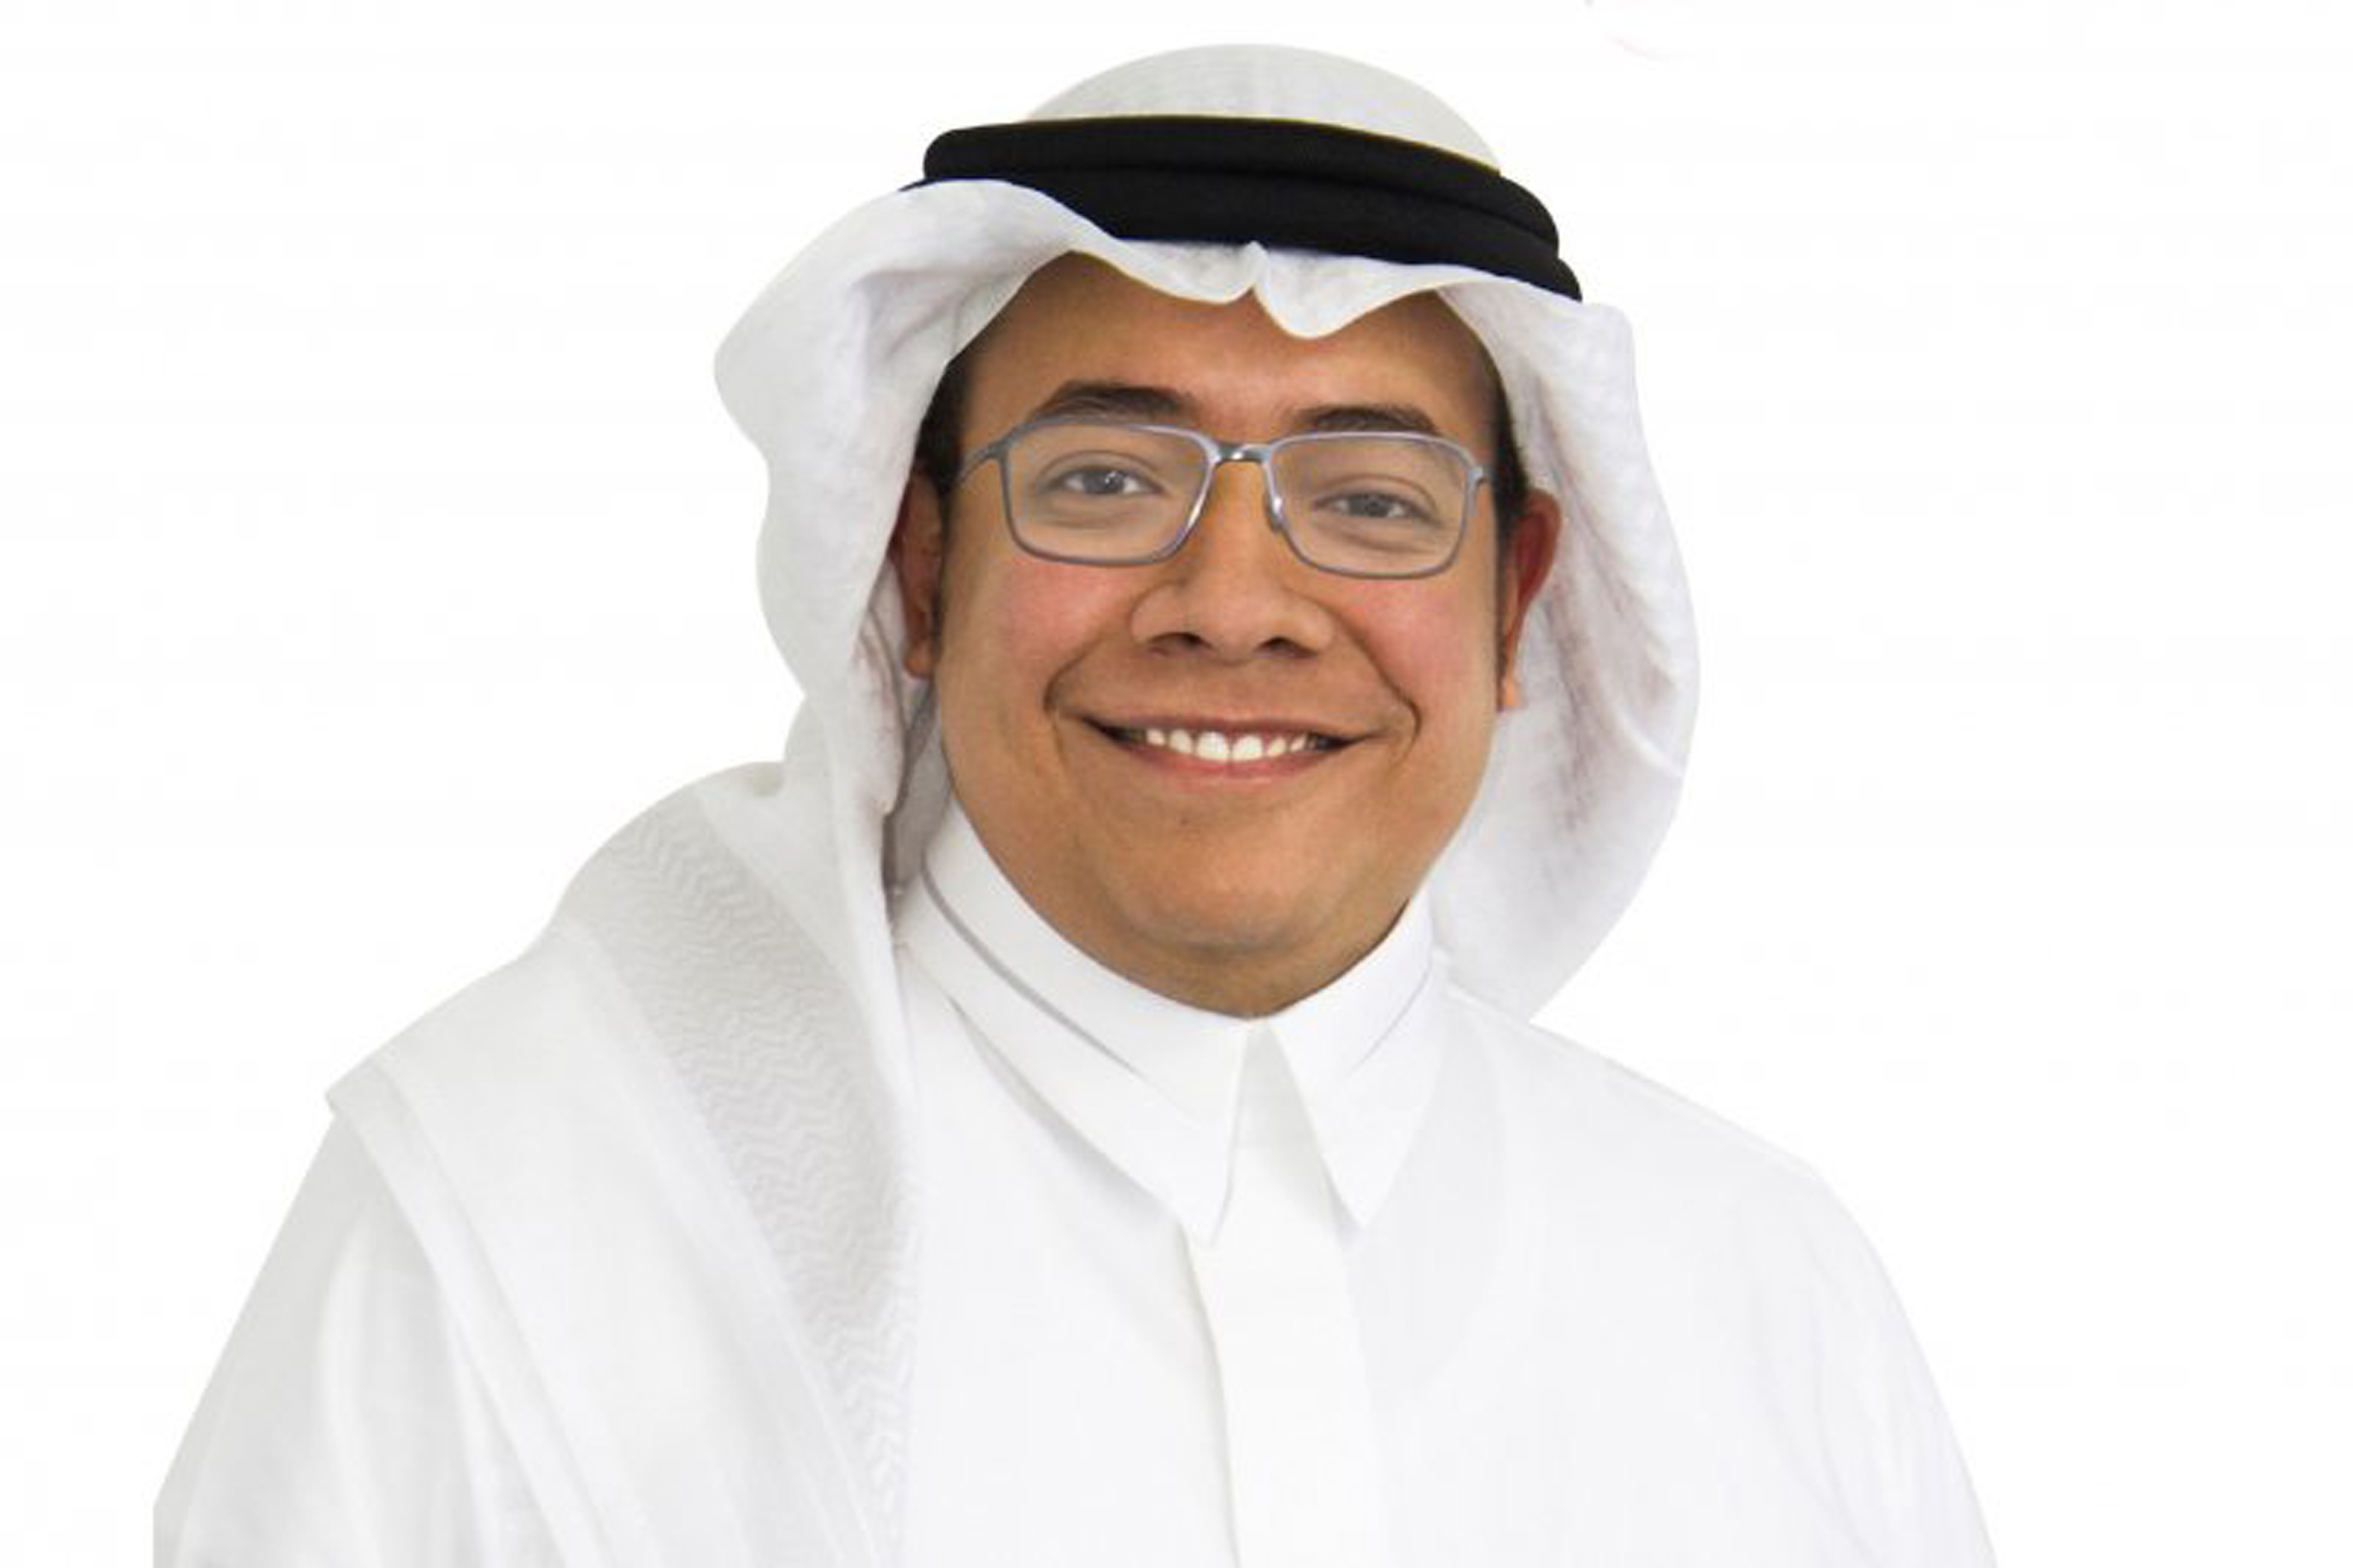 Dr. Moataz Bin Ali, VP, Trend Micro, Middle East and North Africa